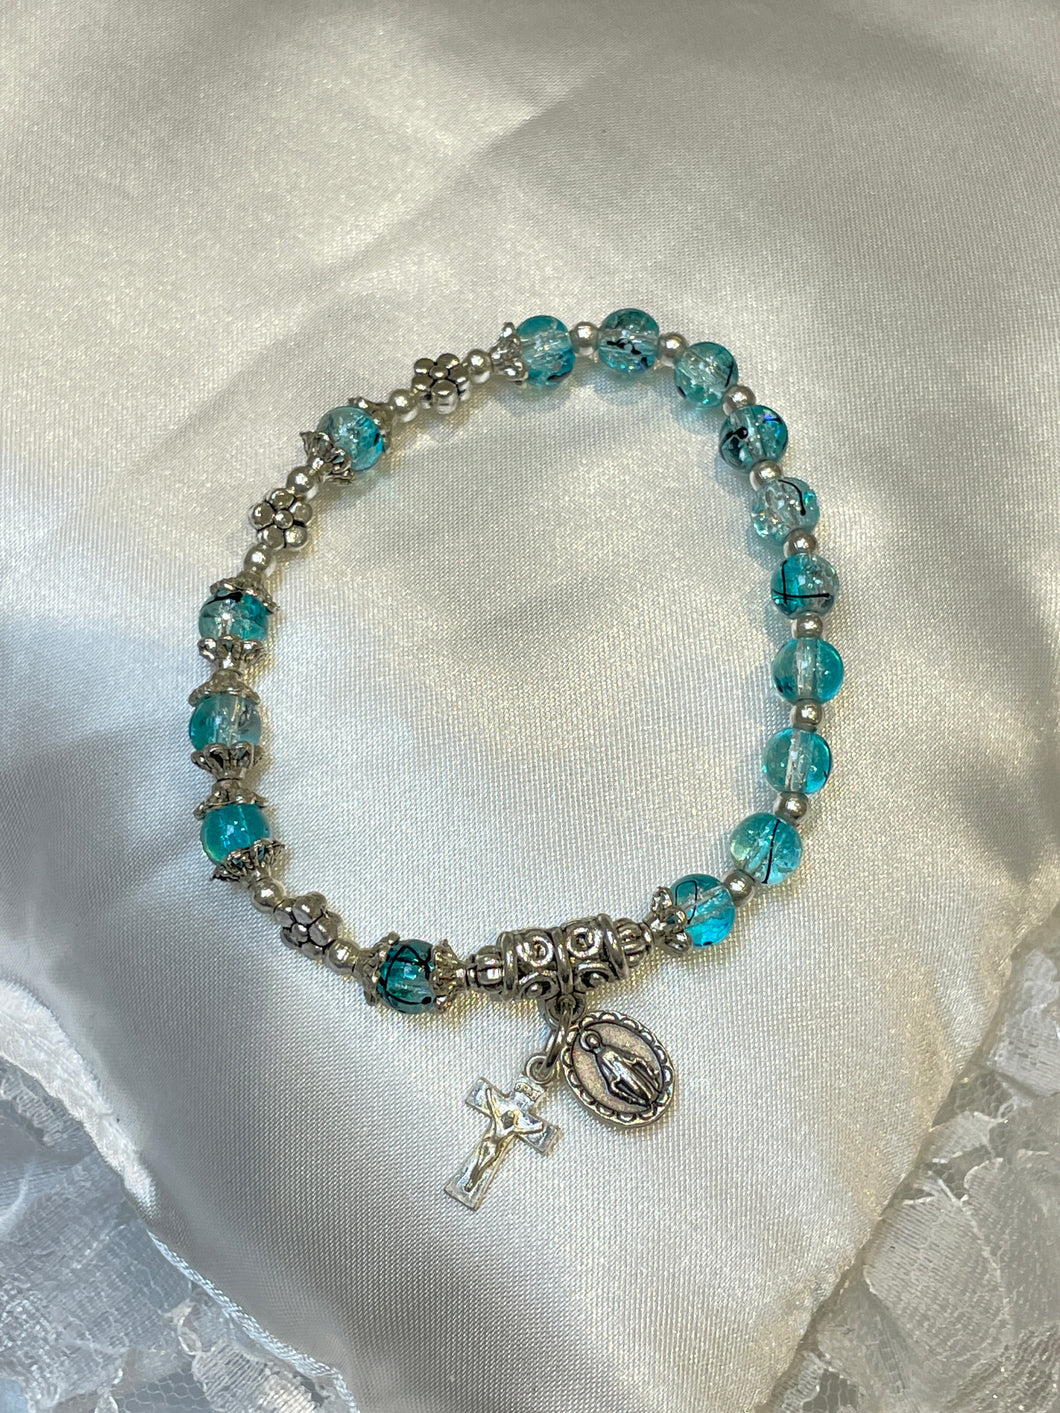 Turquoise Crystal Rosary Bracelet with Miraculous Medal and Crucifix Charms